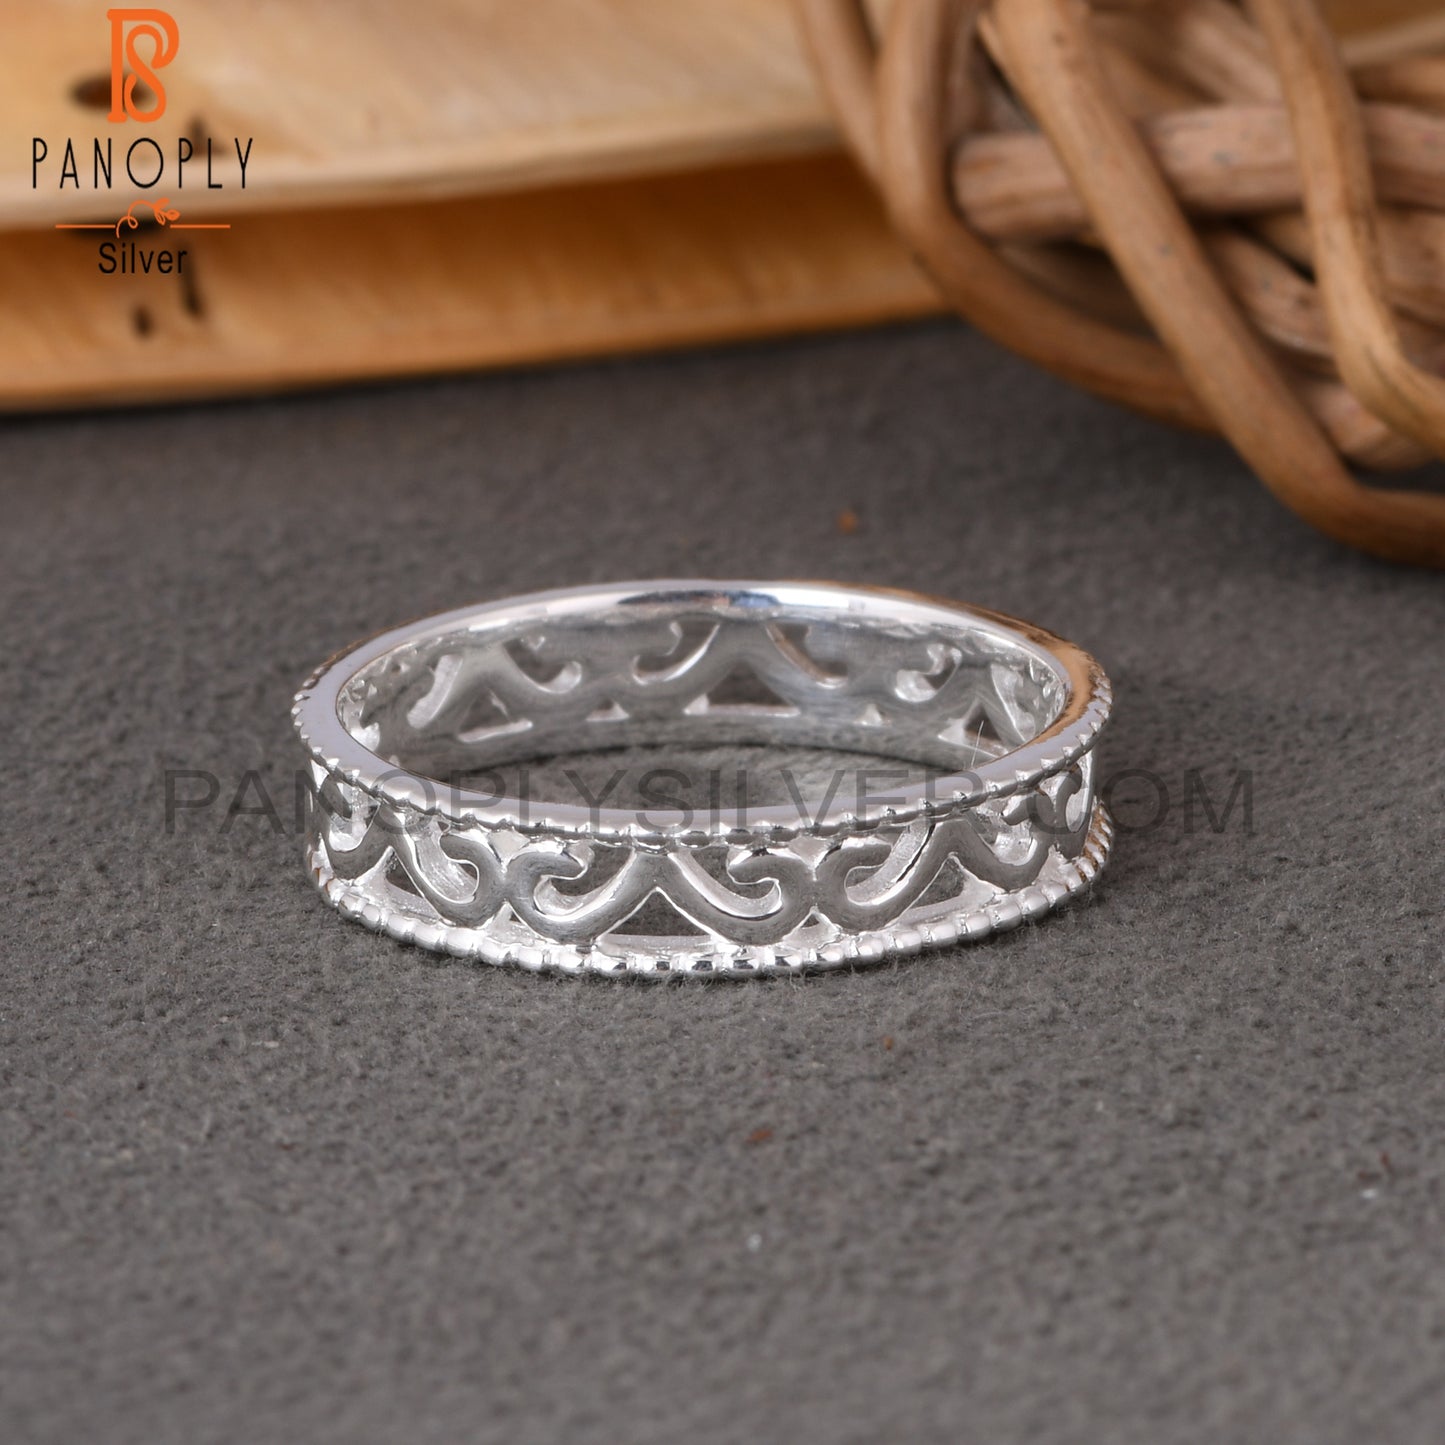 Antique 925 Sterling Silver Ring